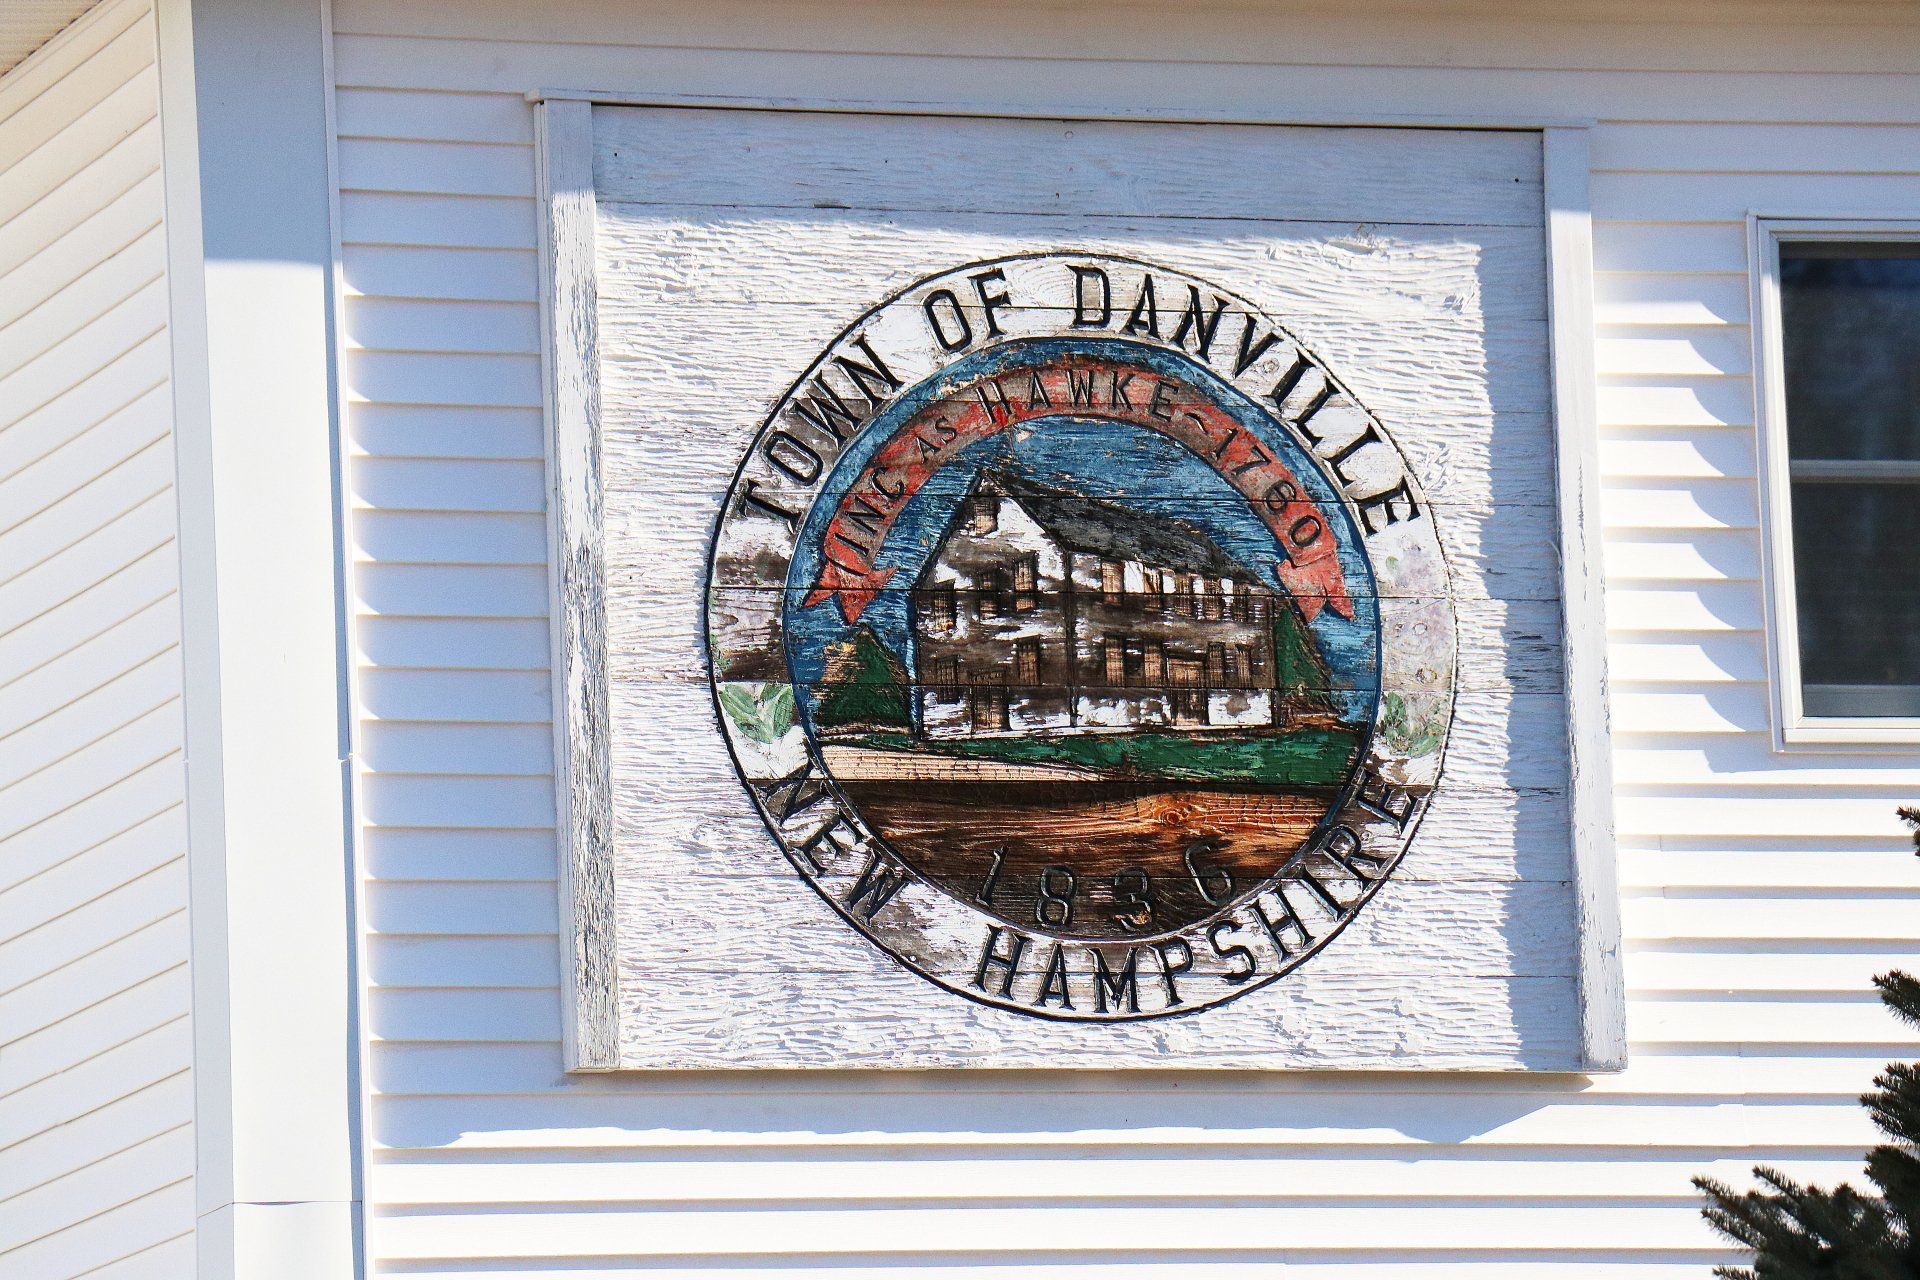 Danville NH's town hall